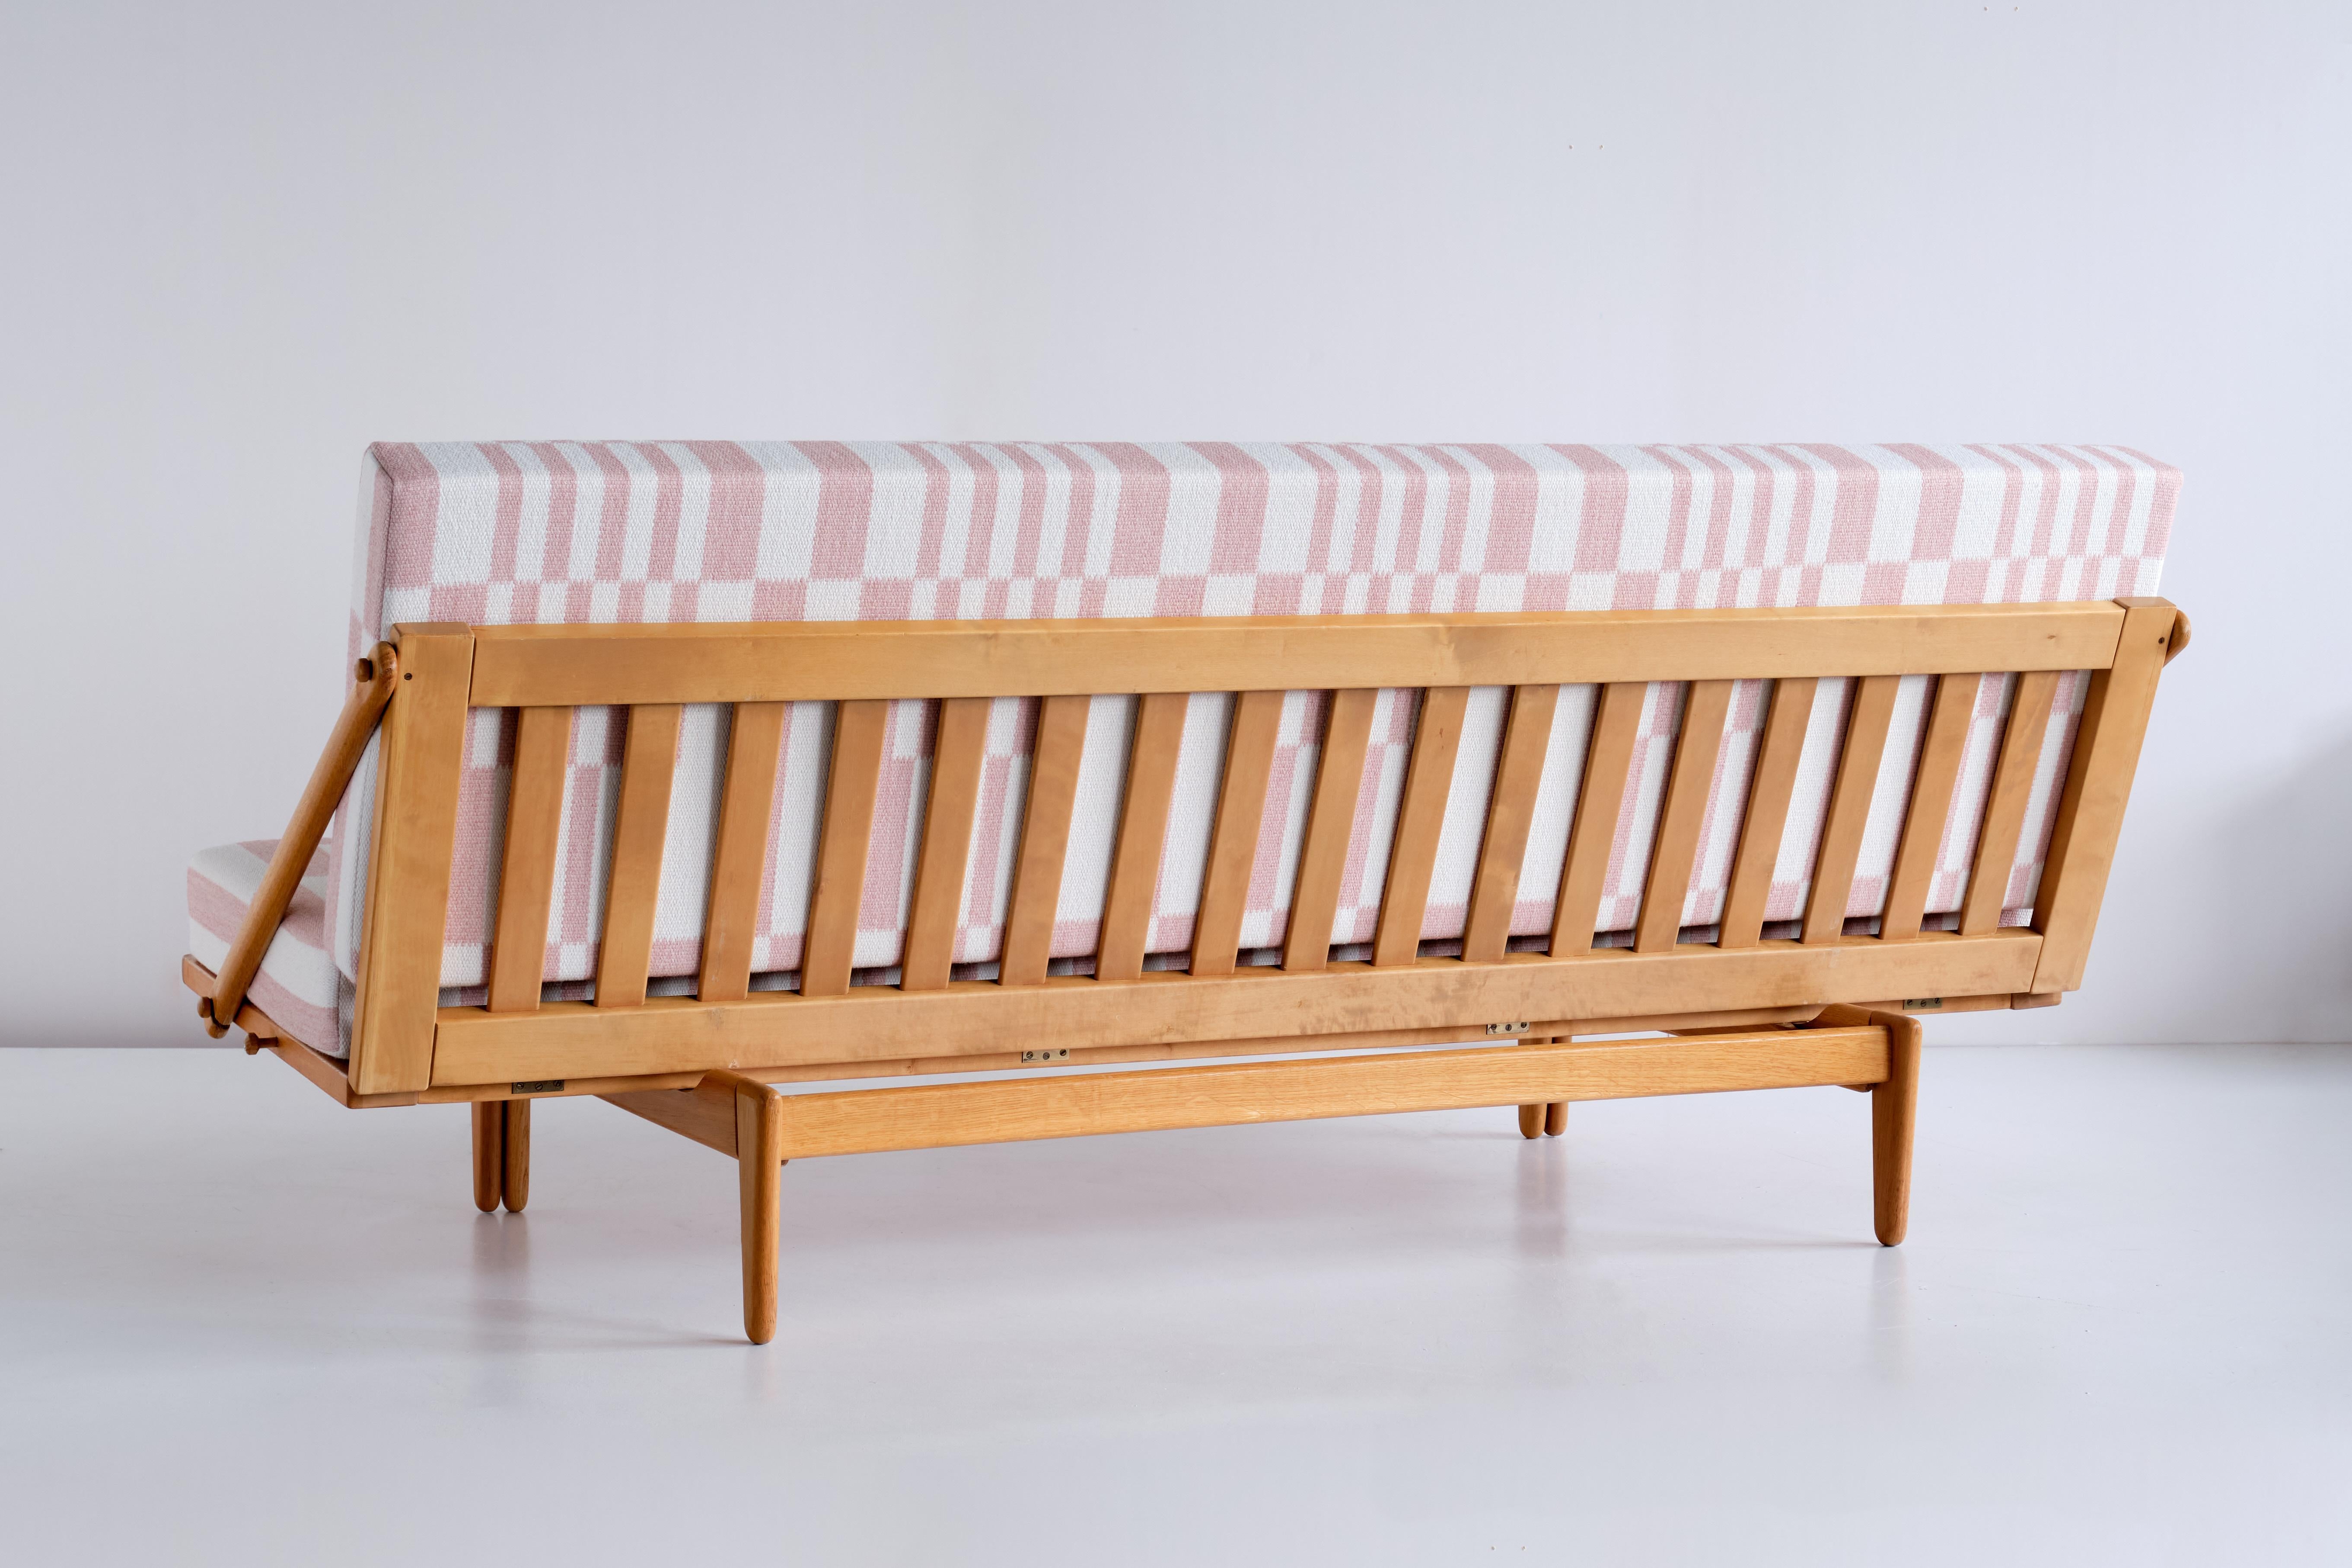 Poul Volther Sofa / Daybed in Oak and Pierre Frey Fabric, Gemla, Sweden, 1955 For Sale 1